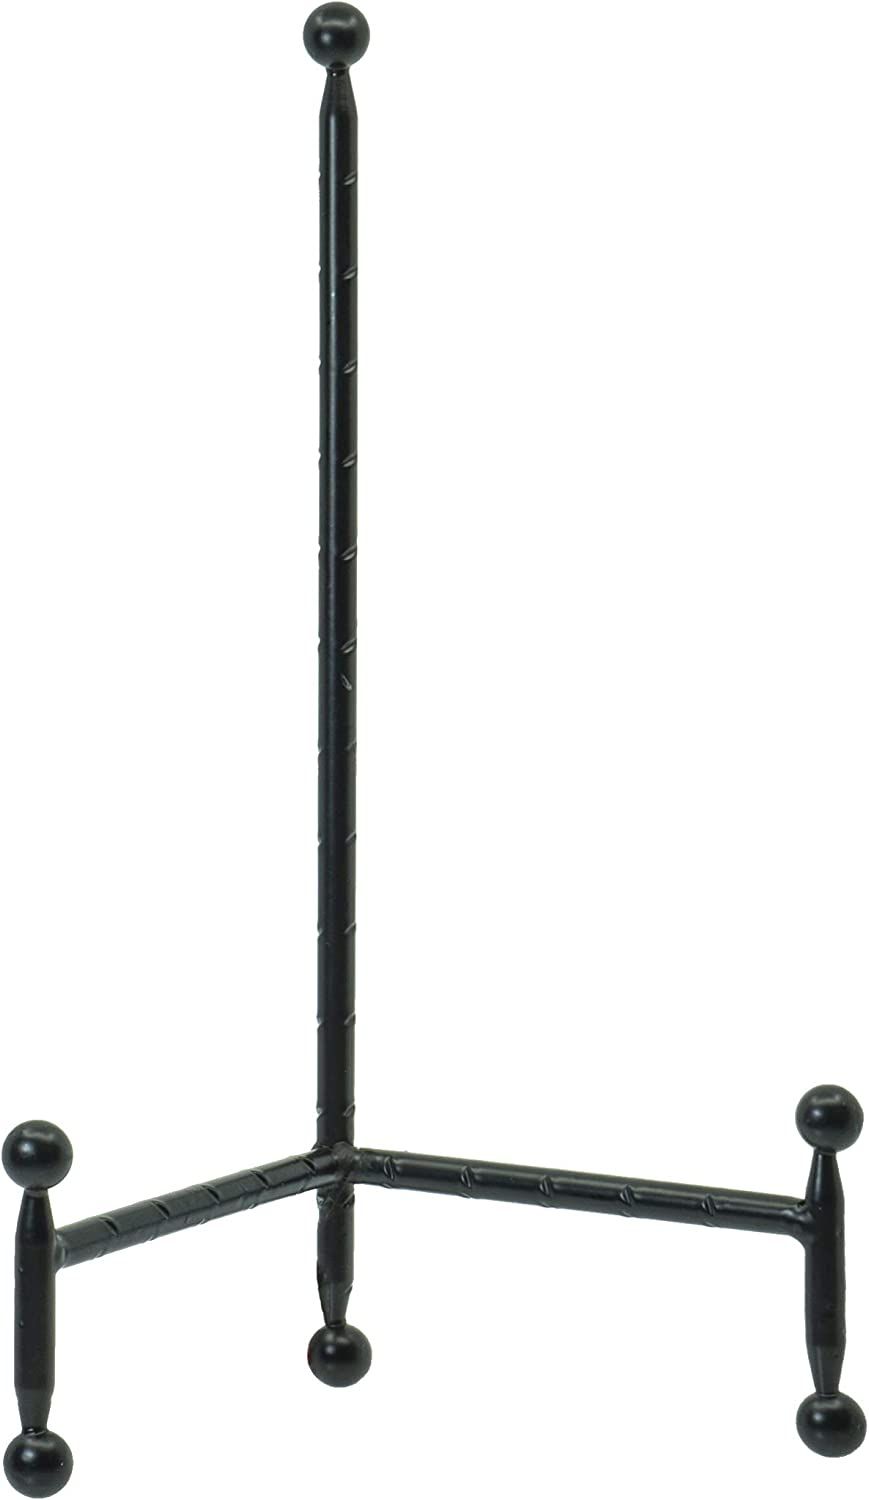 Red Co. Decorative Tripod Plate Stand and Art Holder Easel in Black Finish - 11.5" h | Amazon (US)